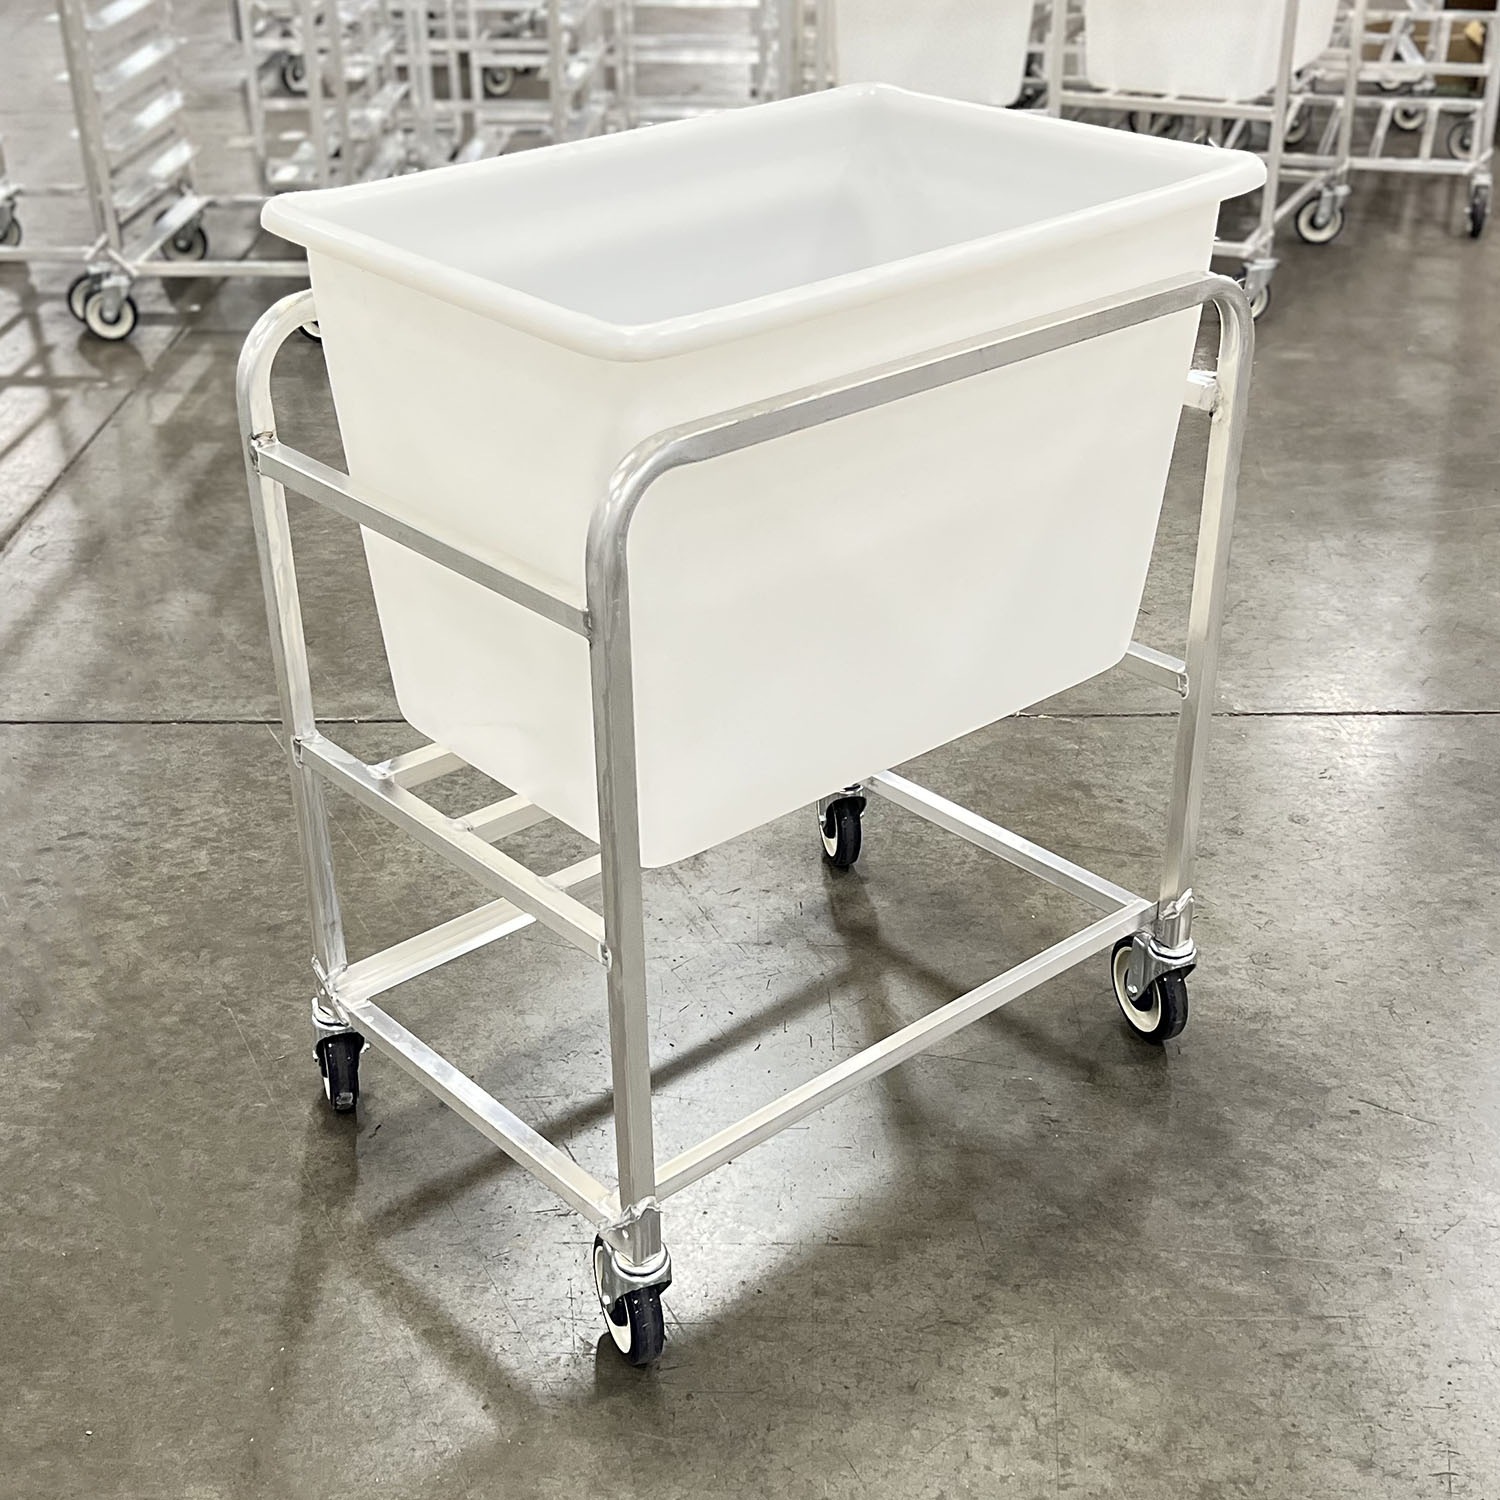 nest dollies industrial cart nesting picking cart NSF cart NSF rack NSF approved NSF certified National Sanitation Foundation tray shelf Distribution Cart picking cart tray shelf picking cart, picking cart, ecom cart, ecommerce cart, ecommerce picking cart, picking cart, INDUSTRIAL CARTS, grocery cart grocery picking cart, department store cart, beverage cart NSF approved. This food service cart meets strict standards and procedures imposed by NSF.